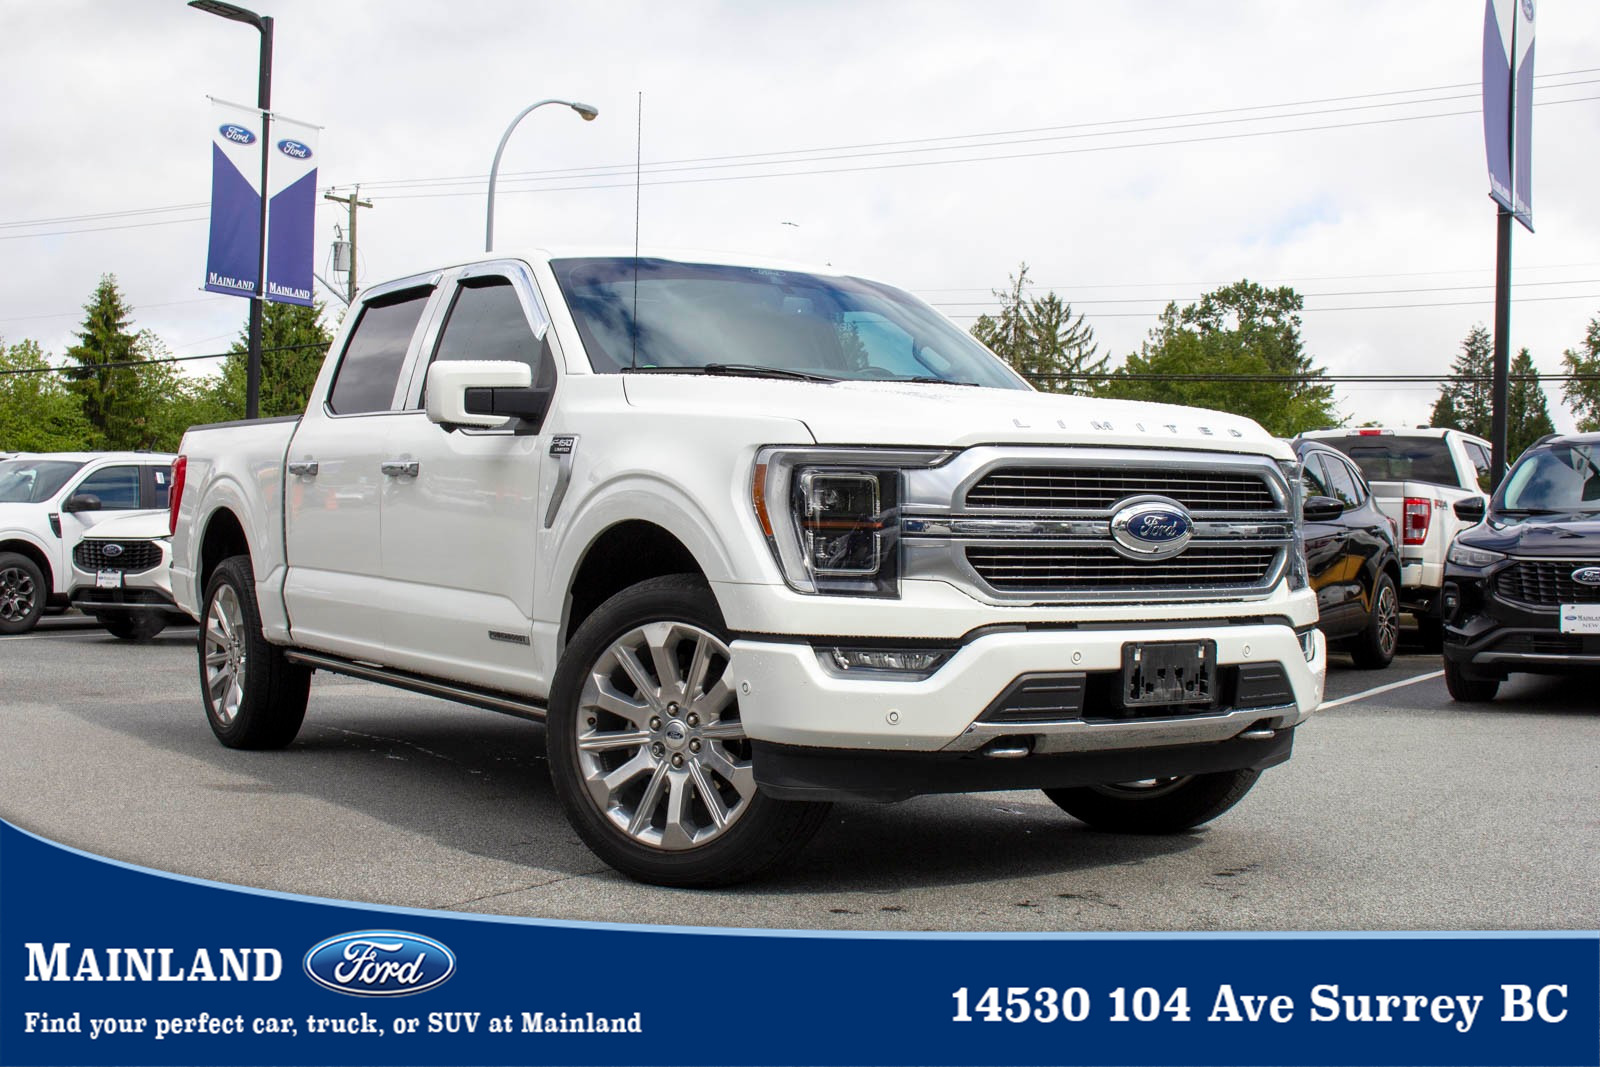 2021 Ford F-150 Limited LOCAL BC, HYBRID, PWR TAILGATE, INTERIOR W